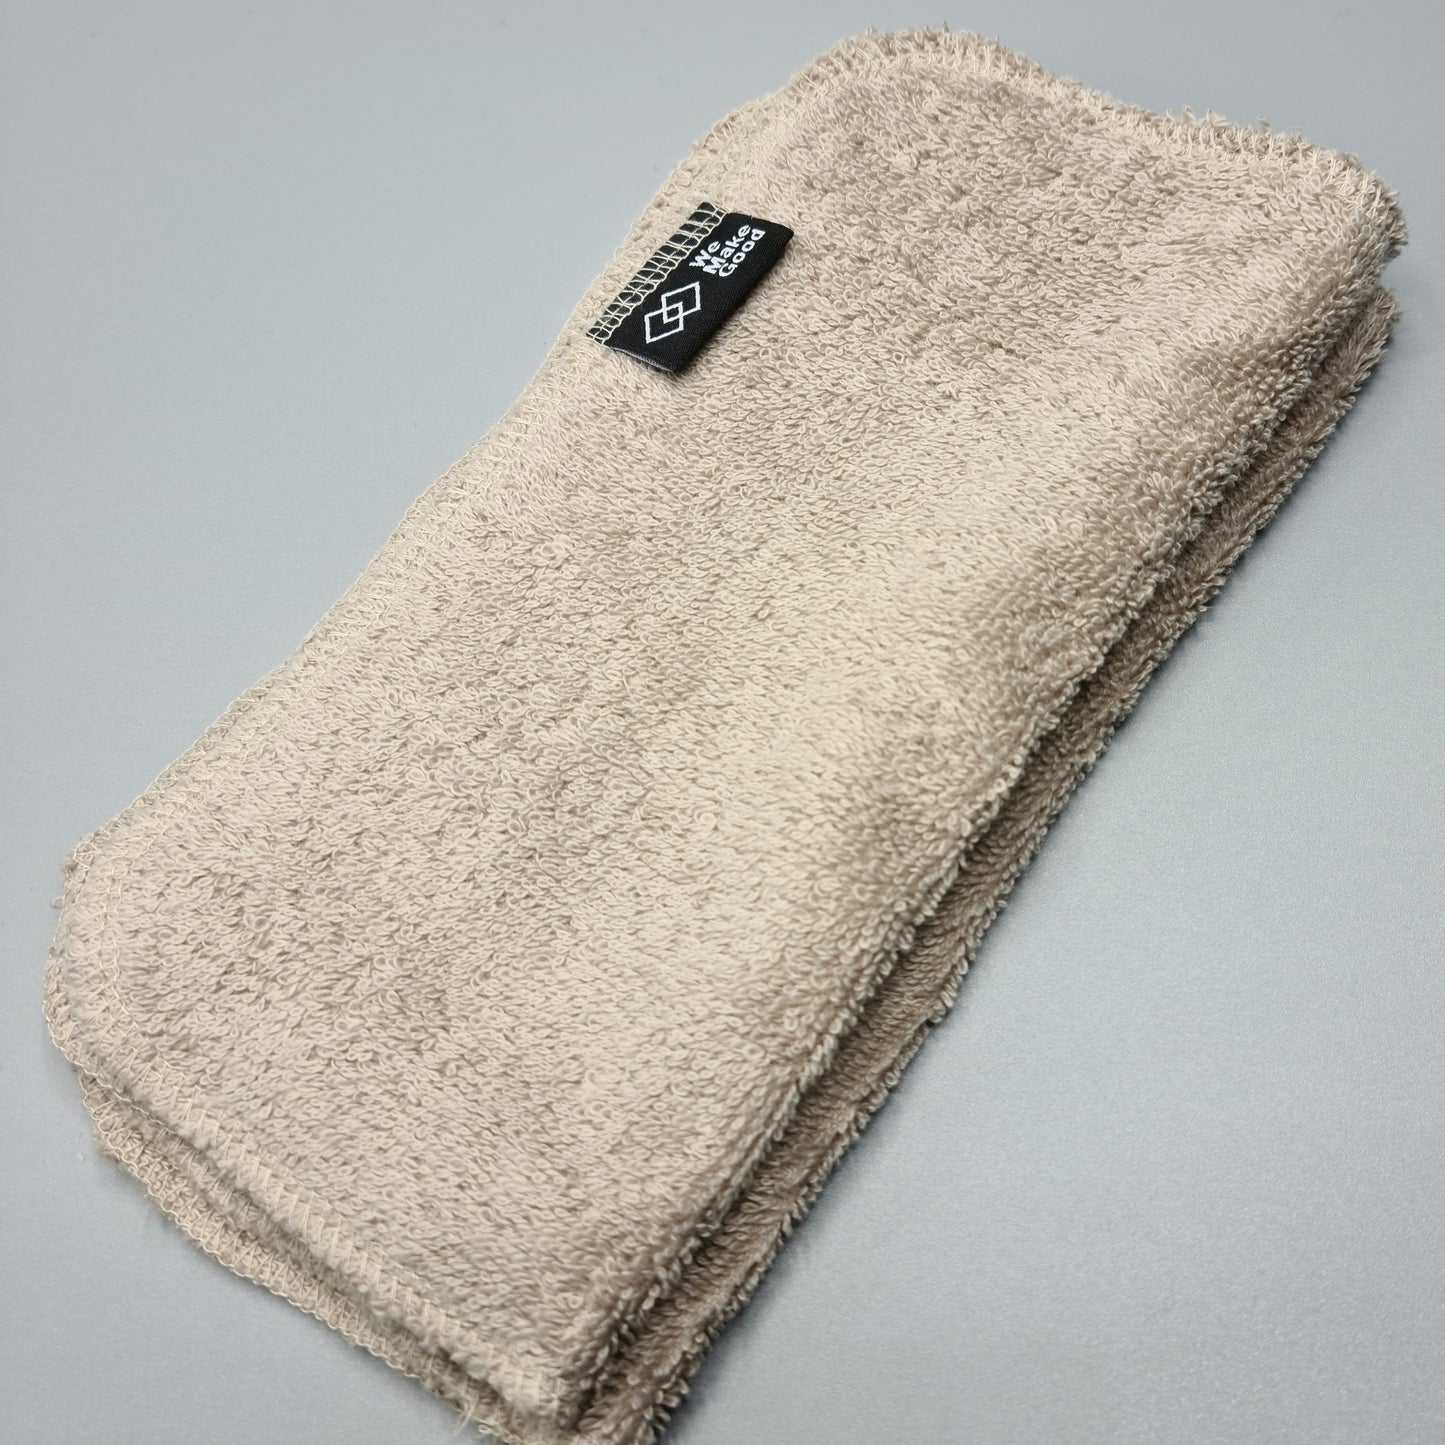 Organic Face Towels - 2 pack